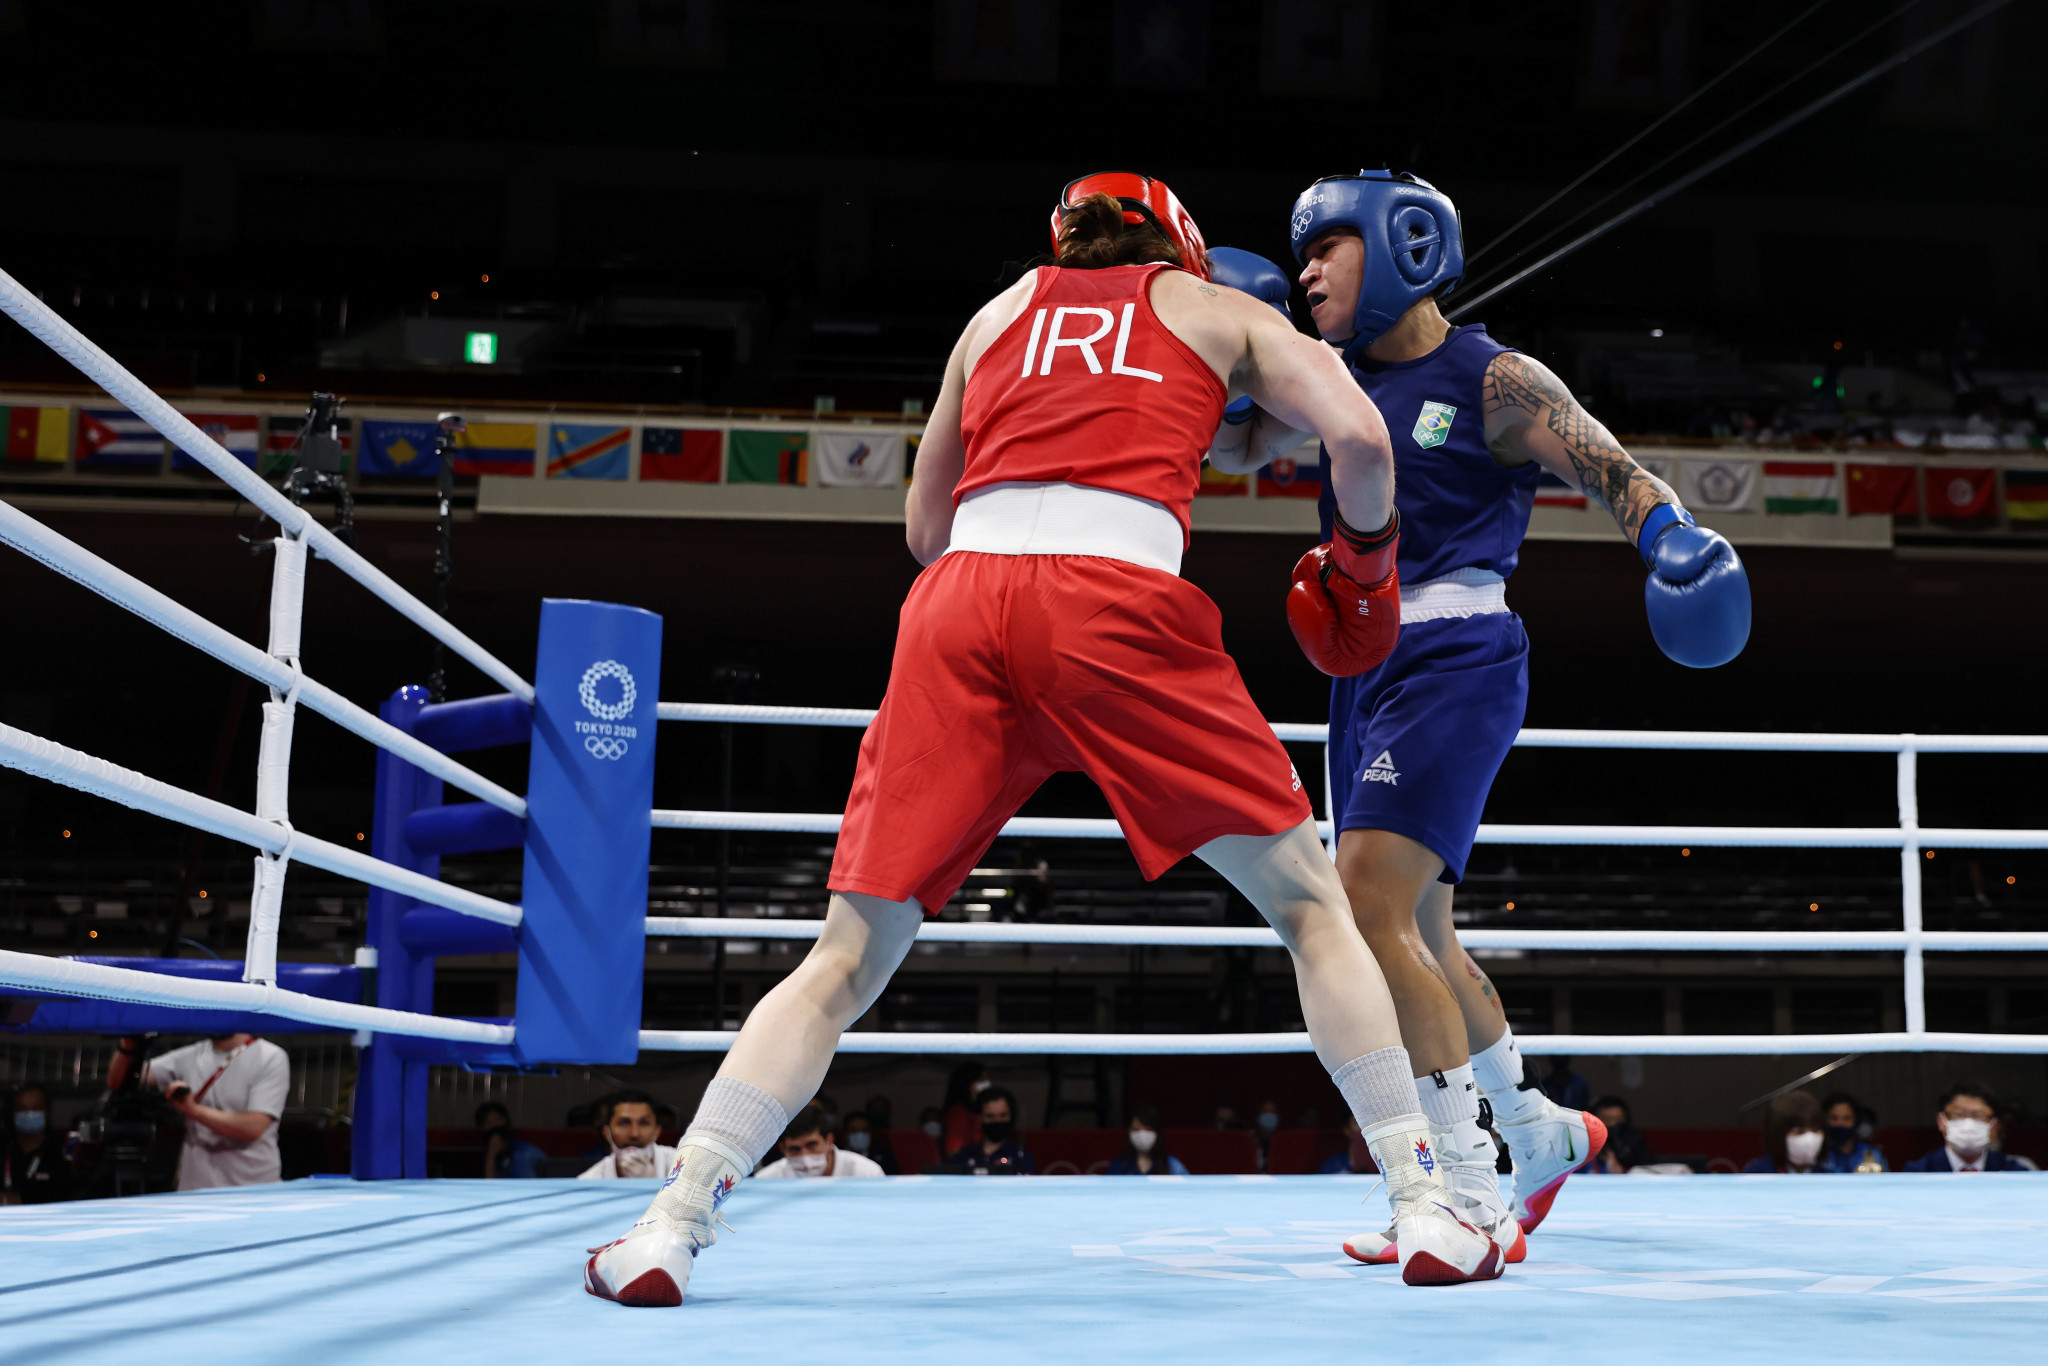 Boxing is Ireland's most successful Olympic sport, and the IABA had been expected to decide whether to join World Boxing later this month ©Getty Images